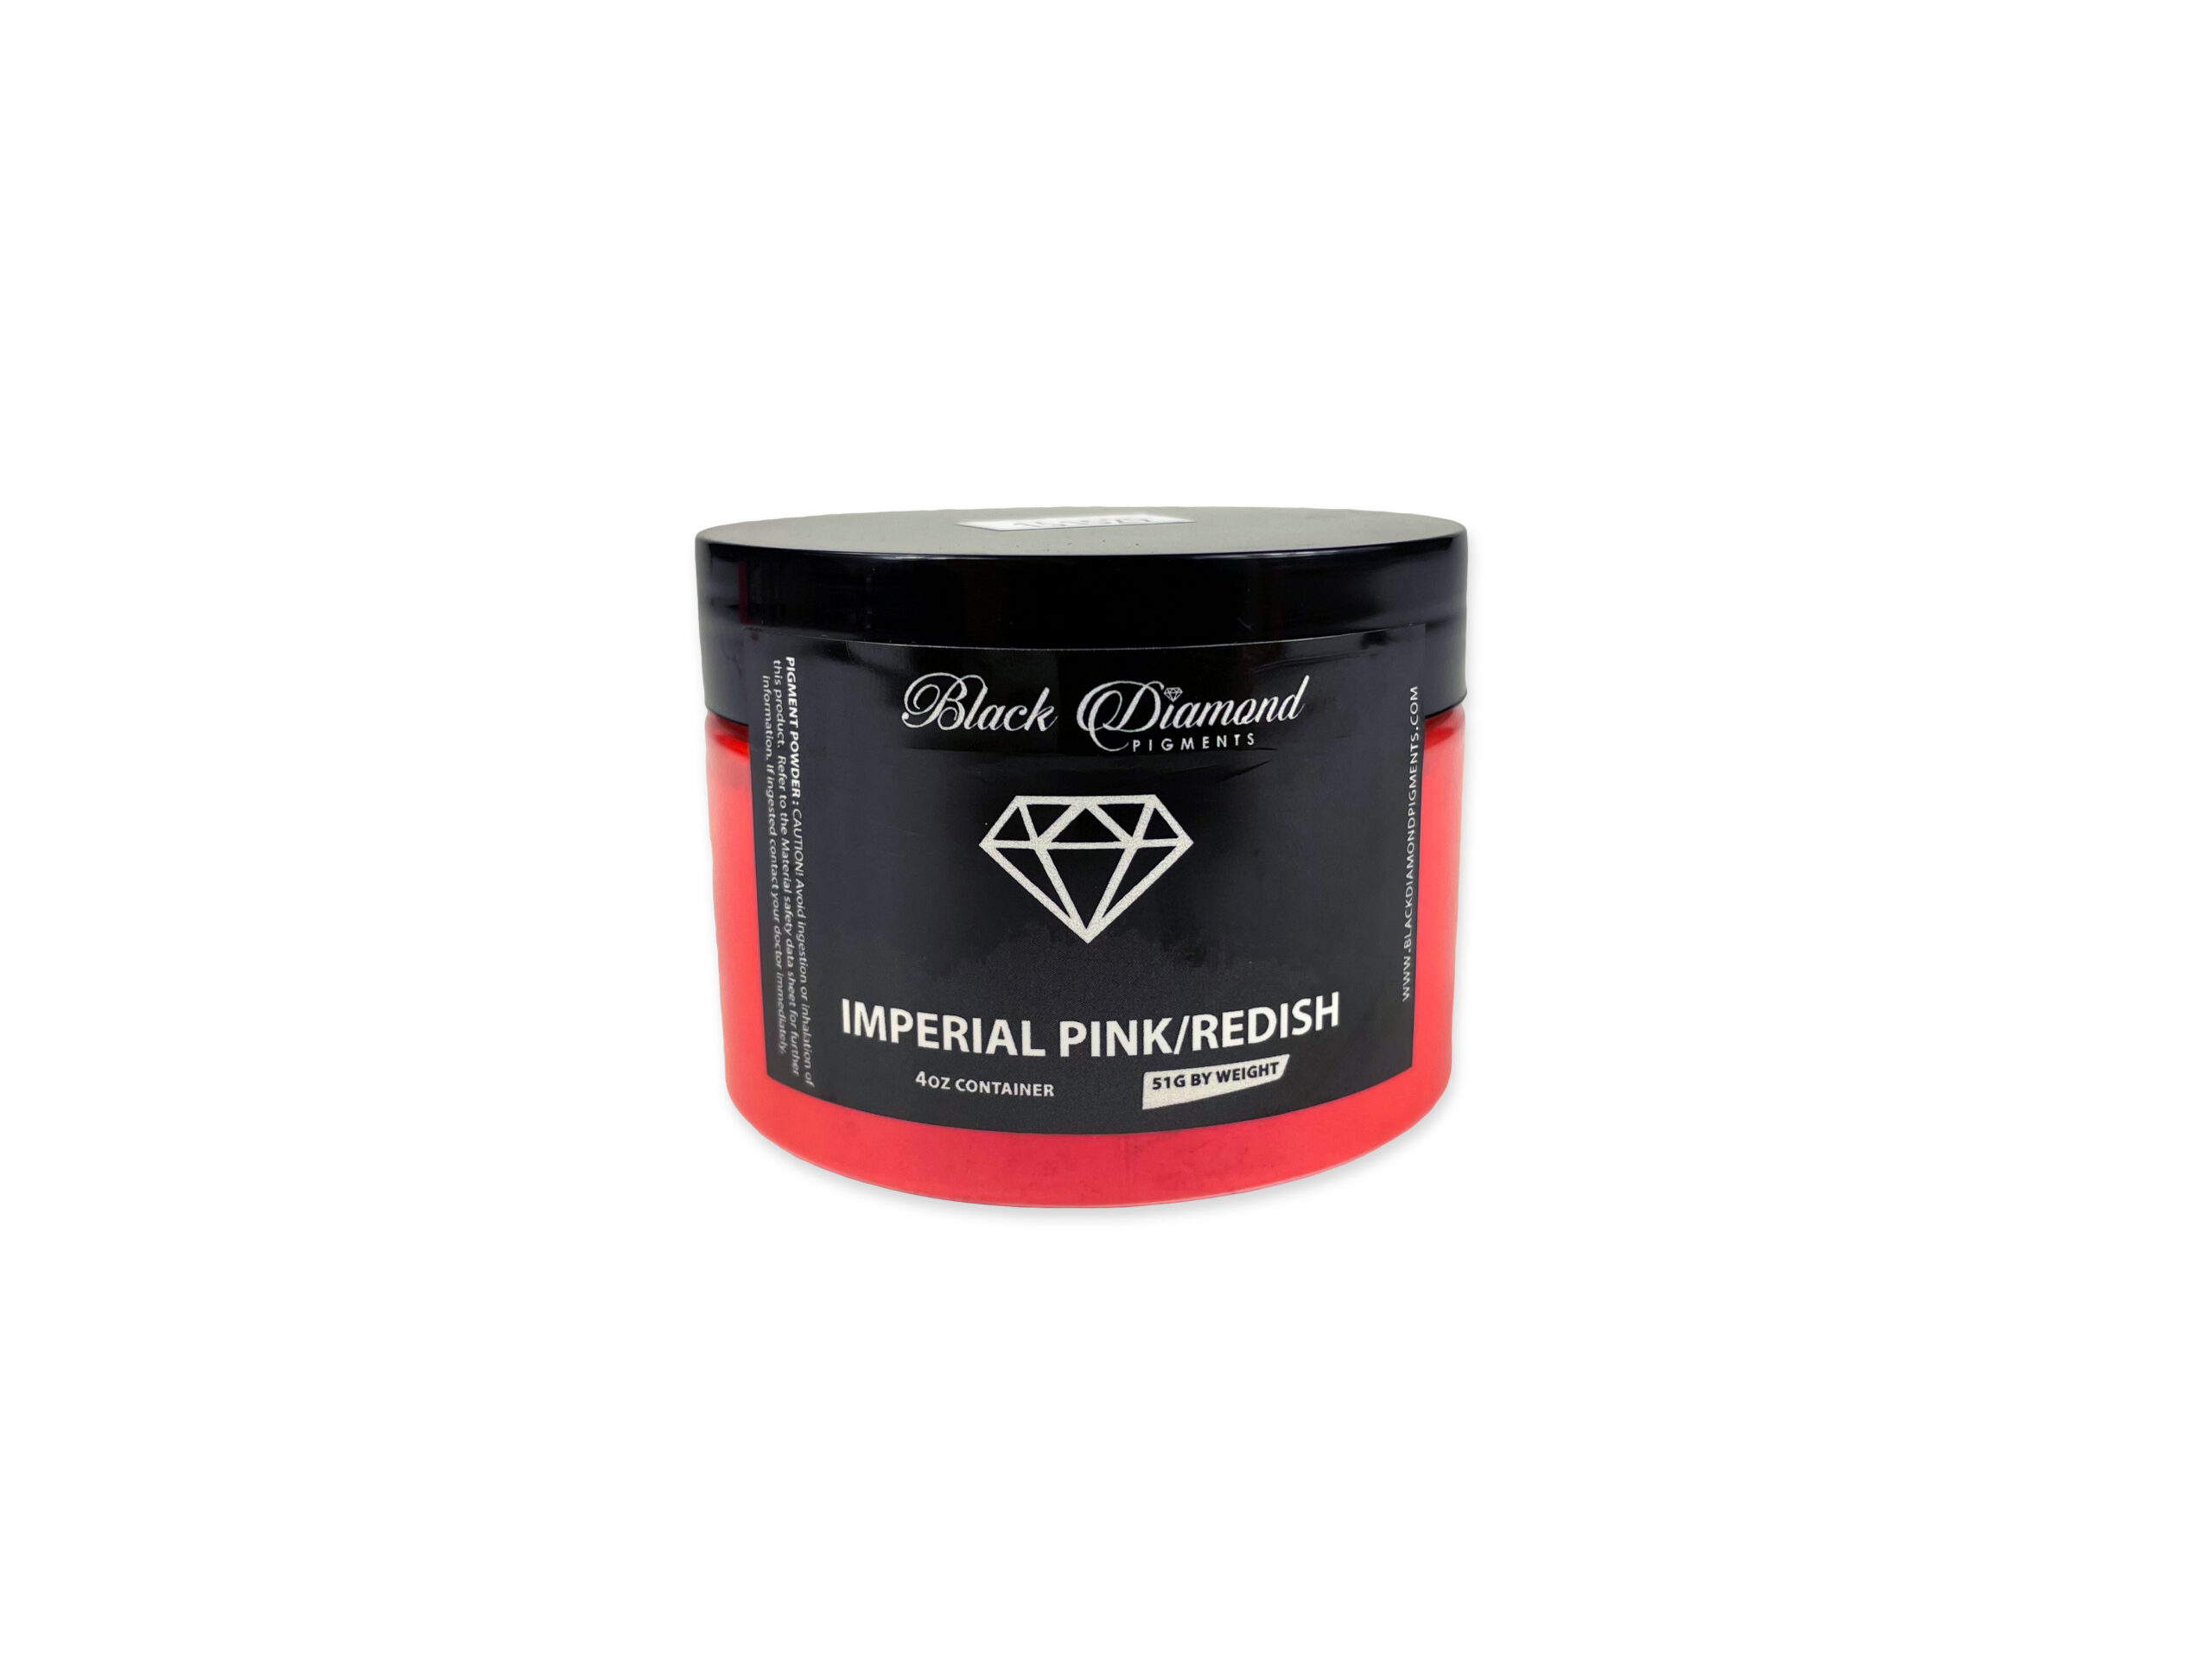 Black Diamond Mica Powder Pigment for epoxy resin in Imperial Pink/ Redish. (4oz container)